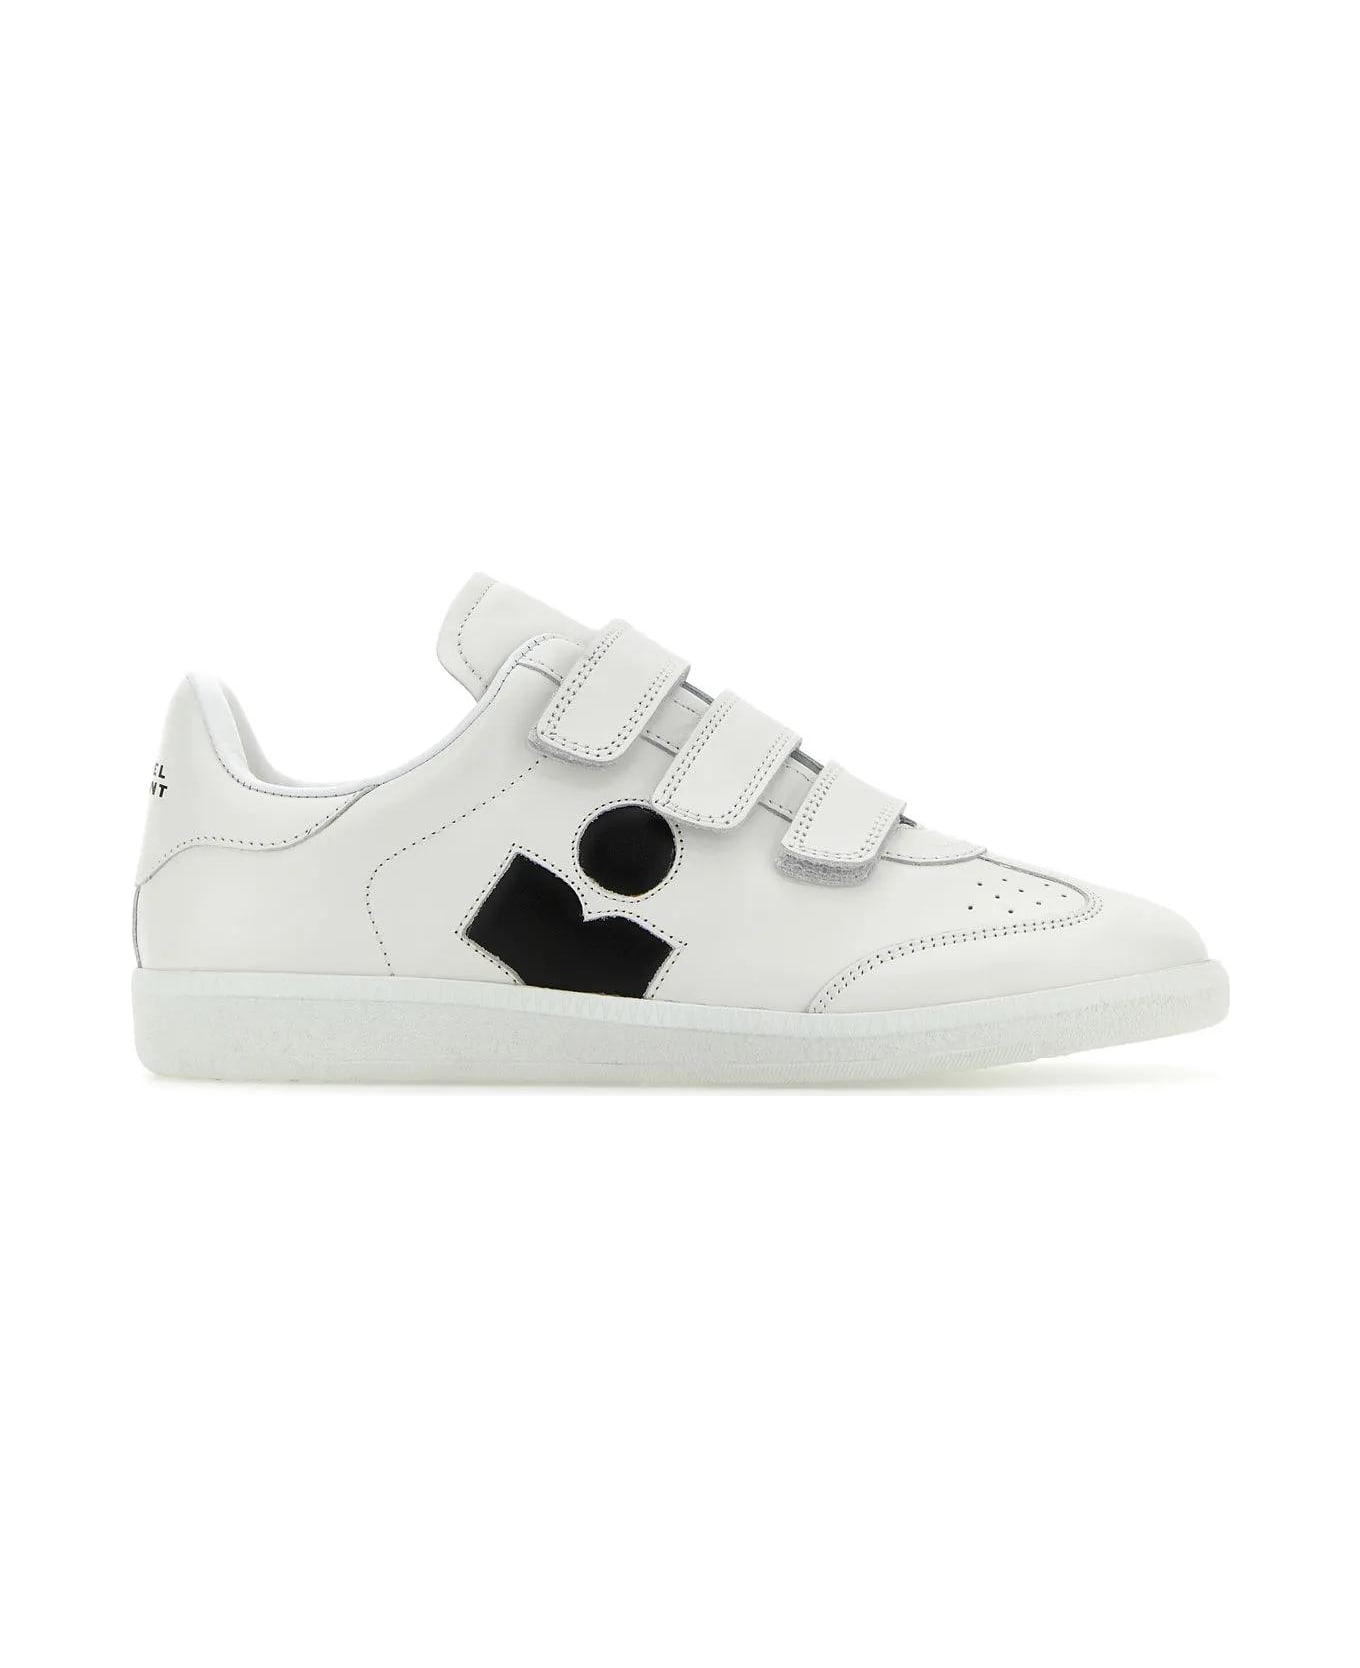 Isabel Marant White Leather Logo Classic Sn Sneakers - White